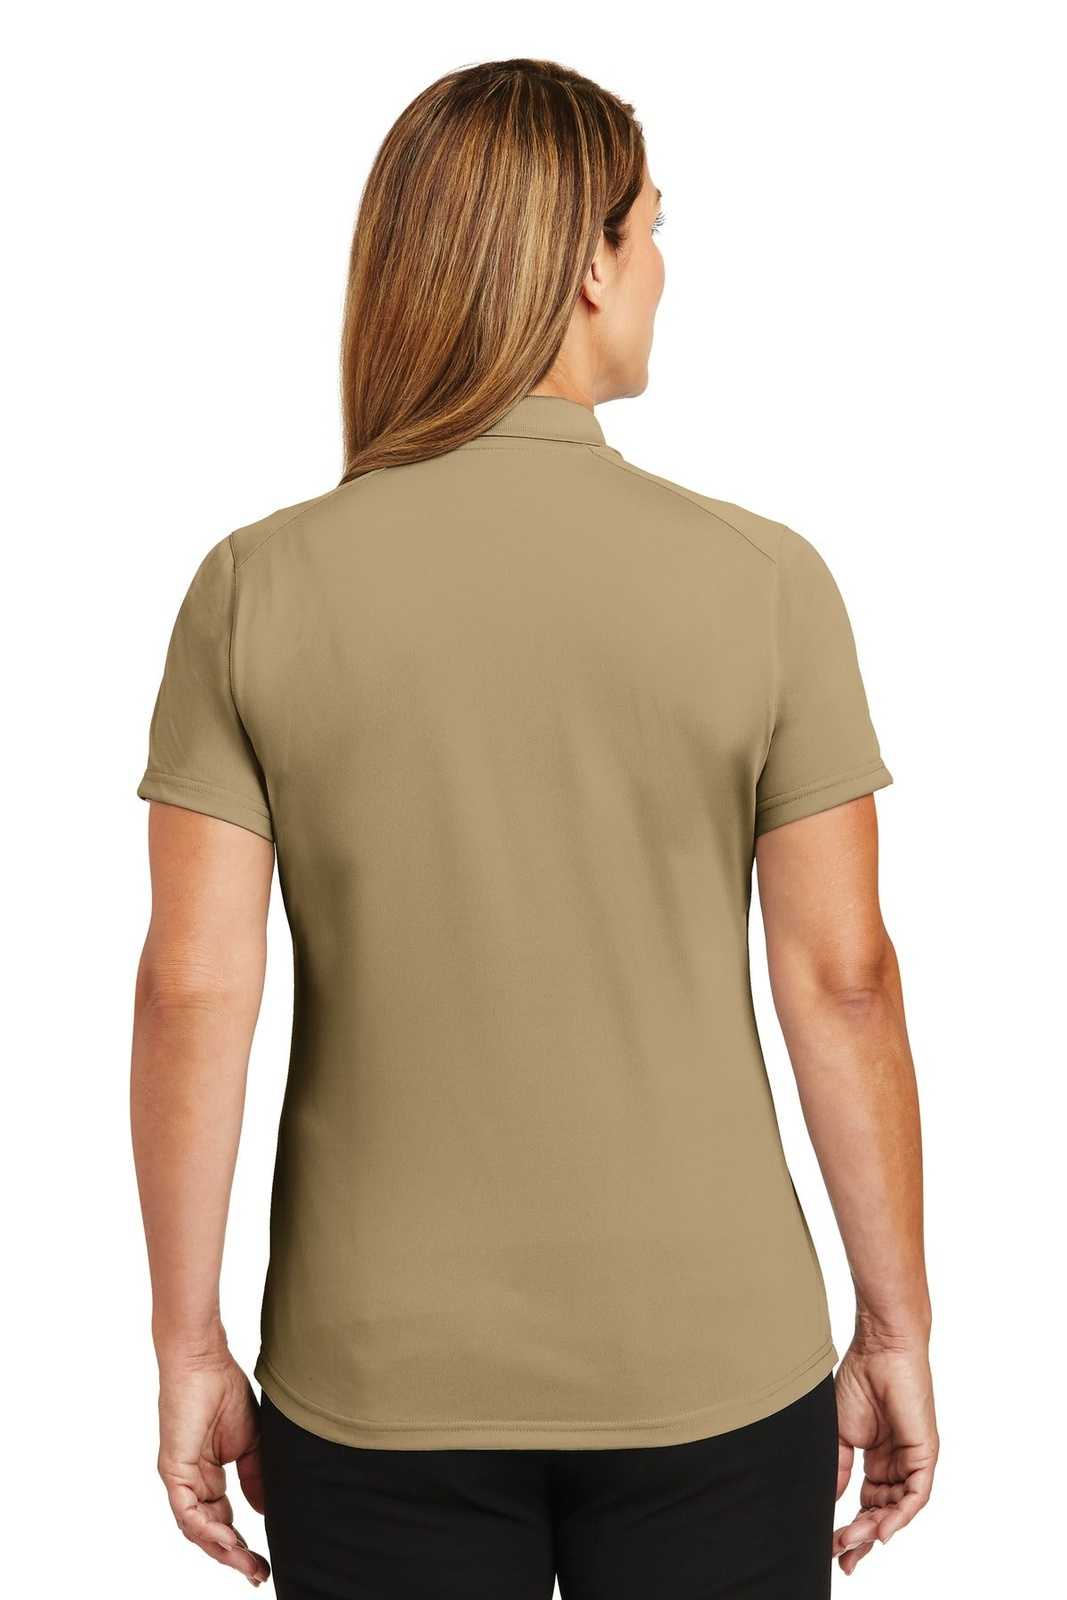 CornerStone CS419 Ladies Select Lightweight Snag-Proof Polo - Tan - HIT a Double - 2